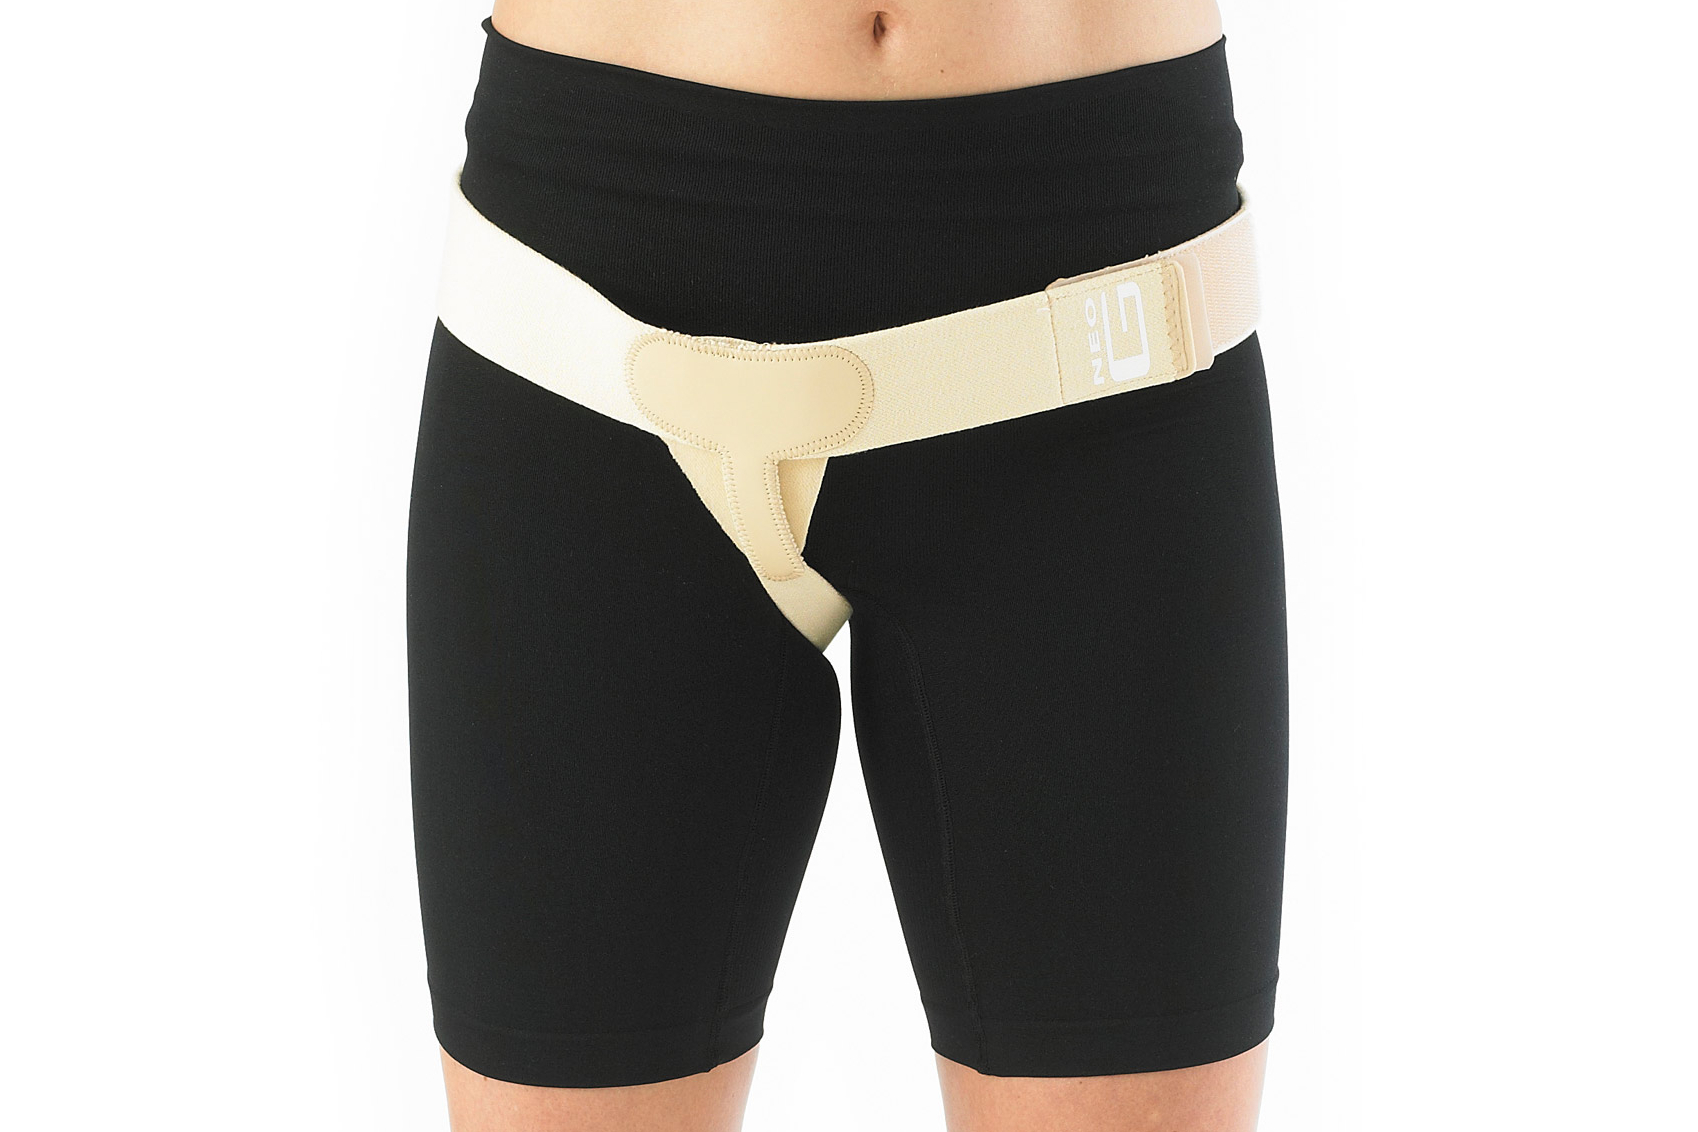 Neo G Lower Hernia Support Spinal Products